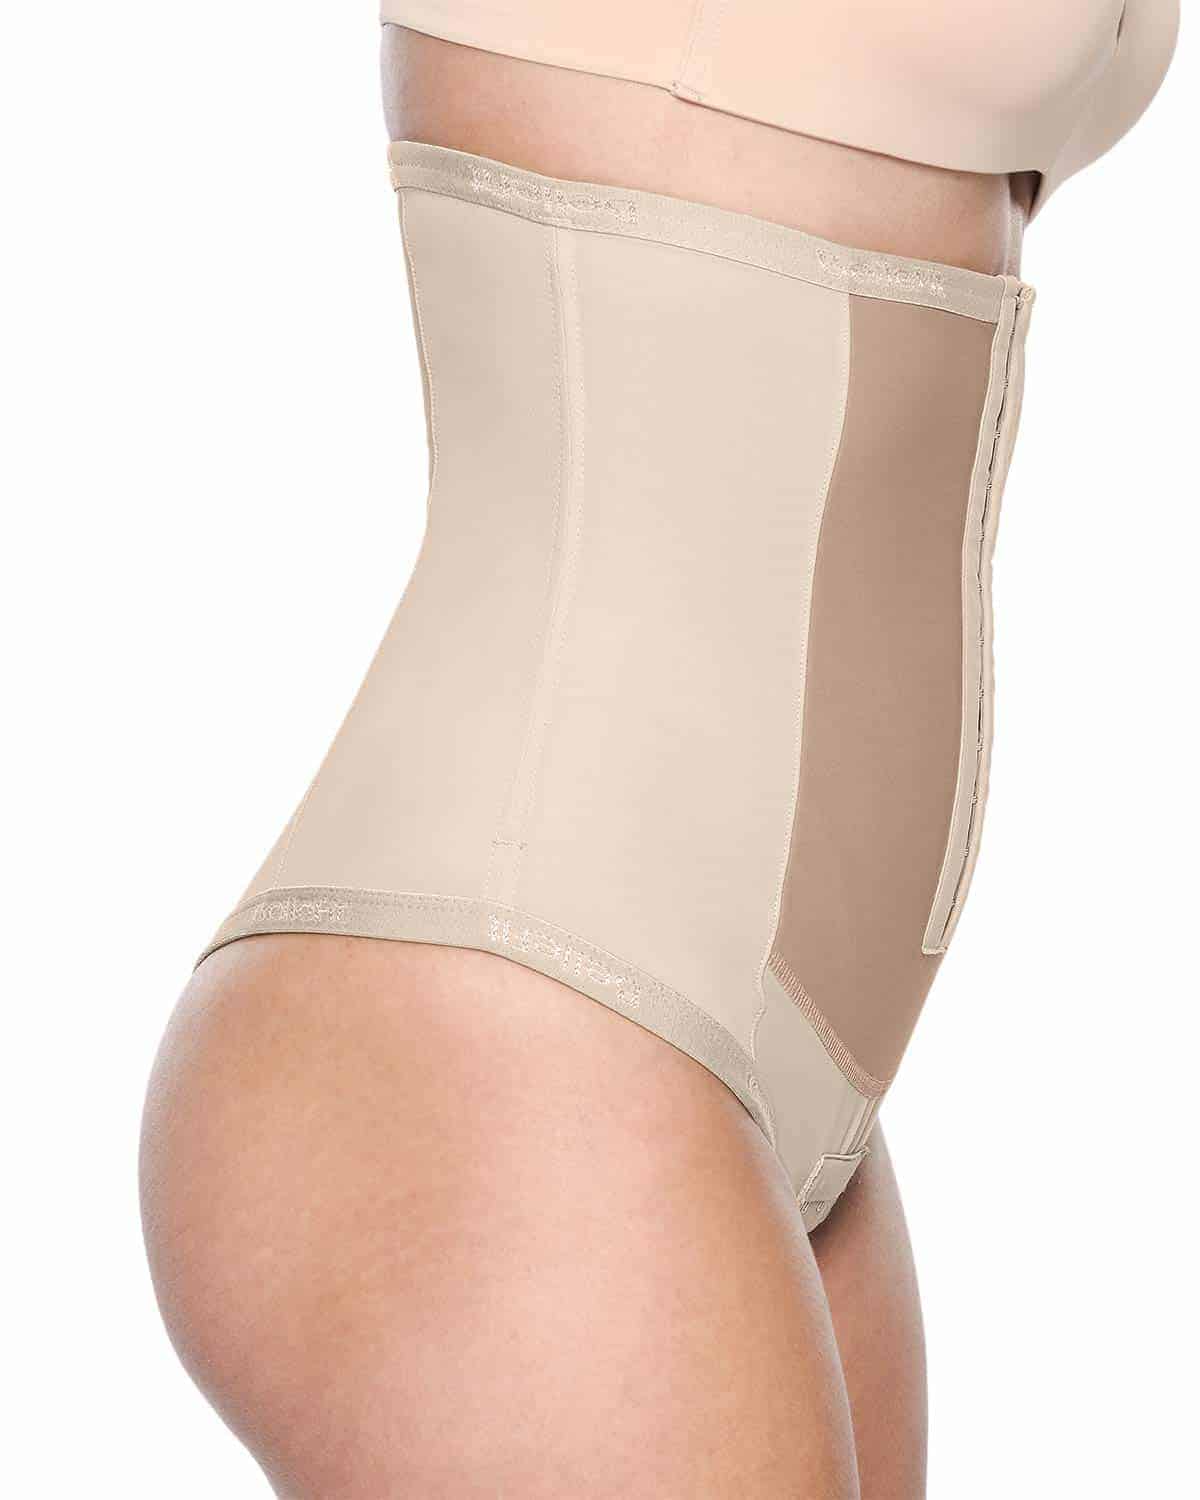 Fun with Postpartum Girdles (and: My Bellefit Corset Review